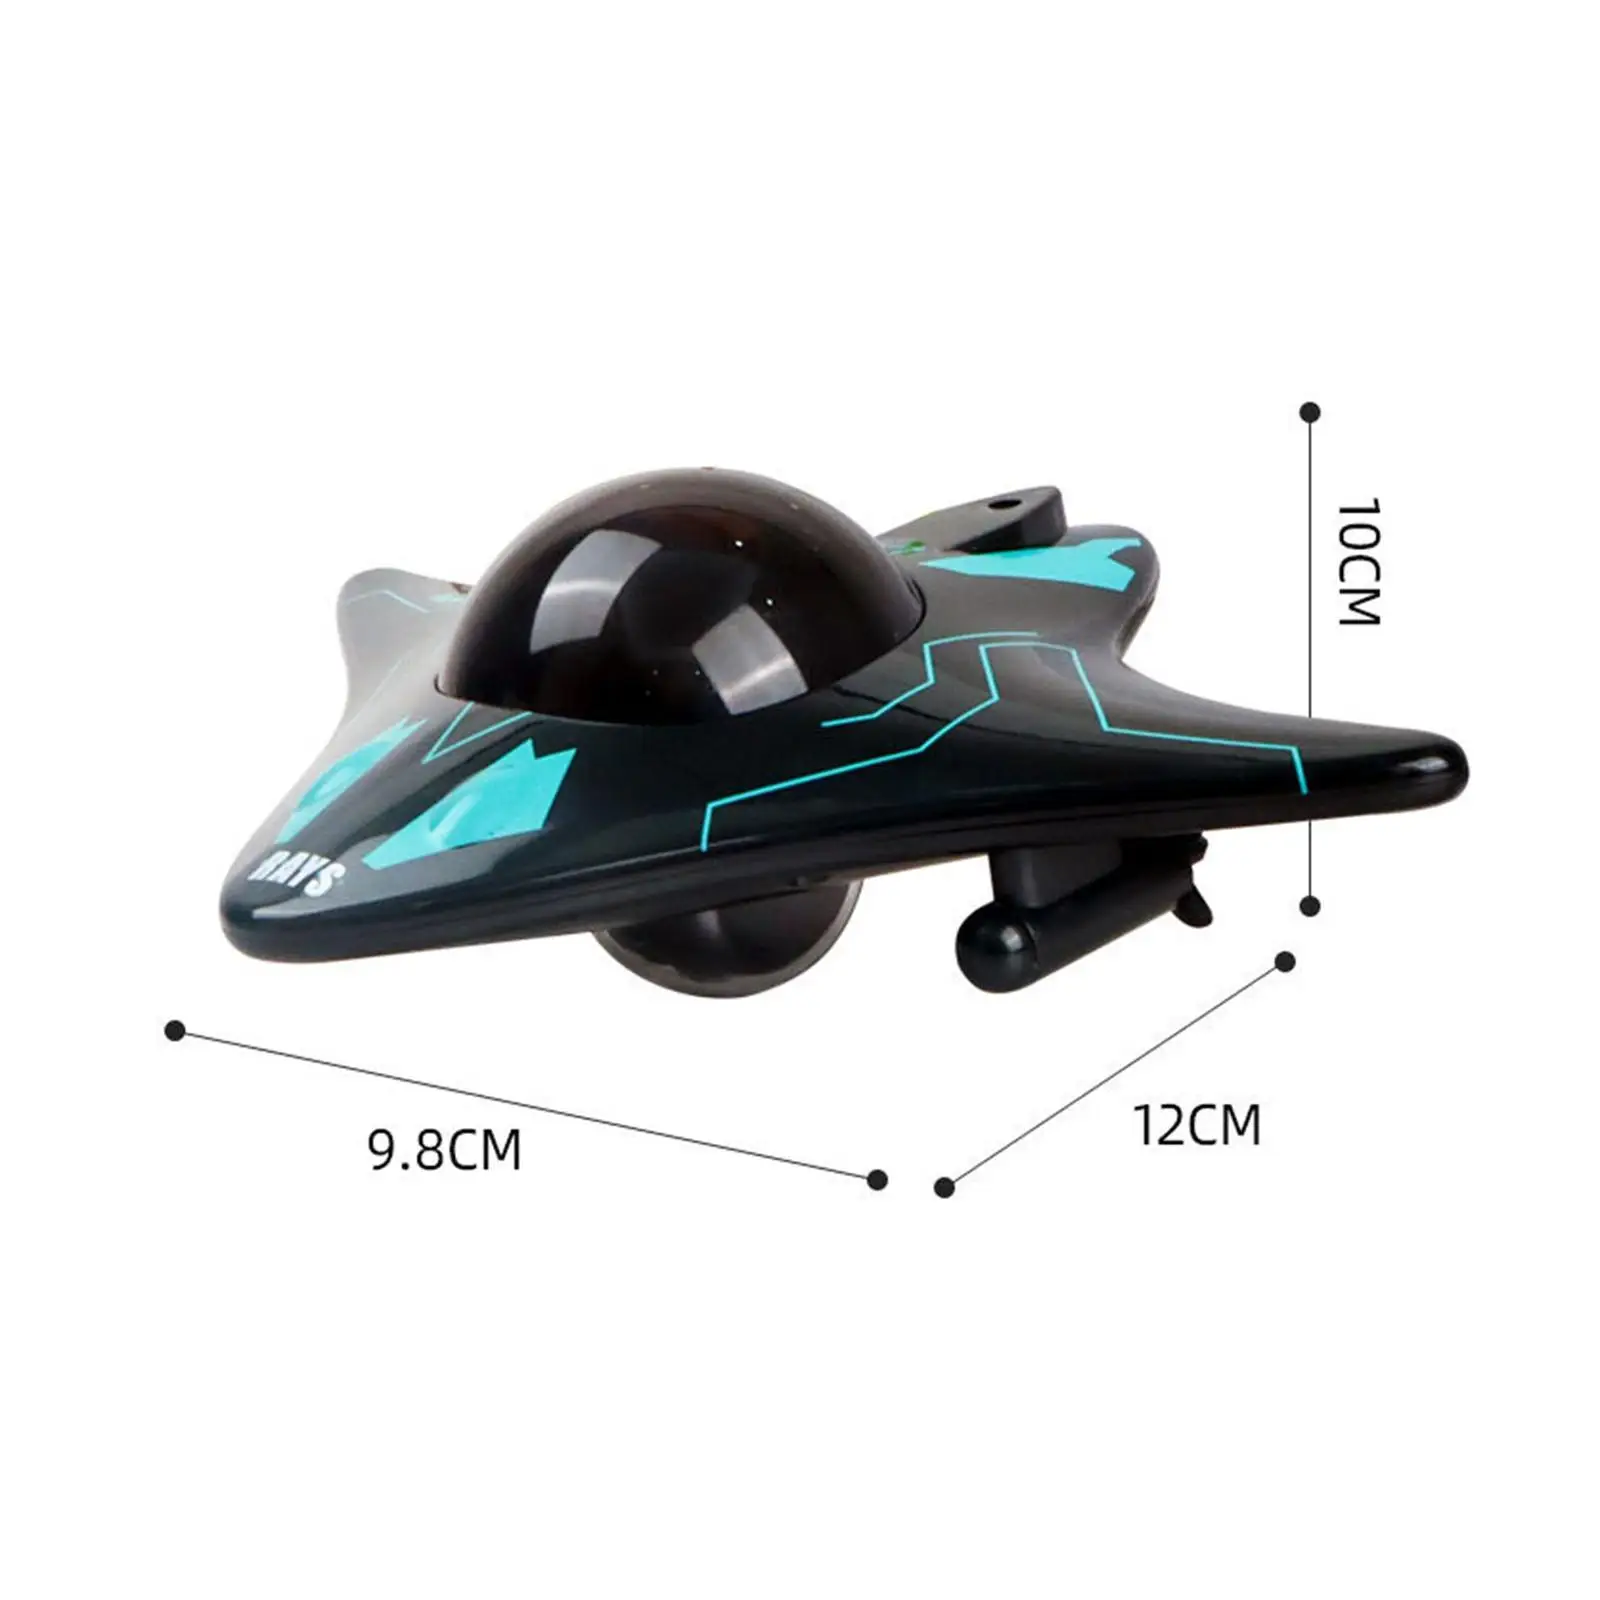 Remote Control Boat Toy Pools RC Submarine Toy Batfish Speedboat Lakes Portable Charging Toy RC Boat with Underwater Camera